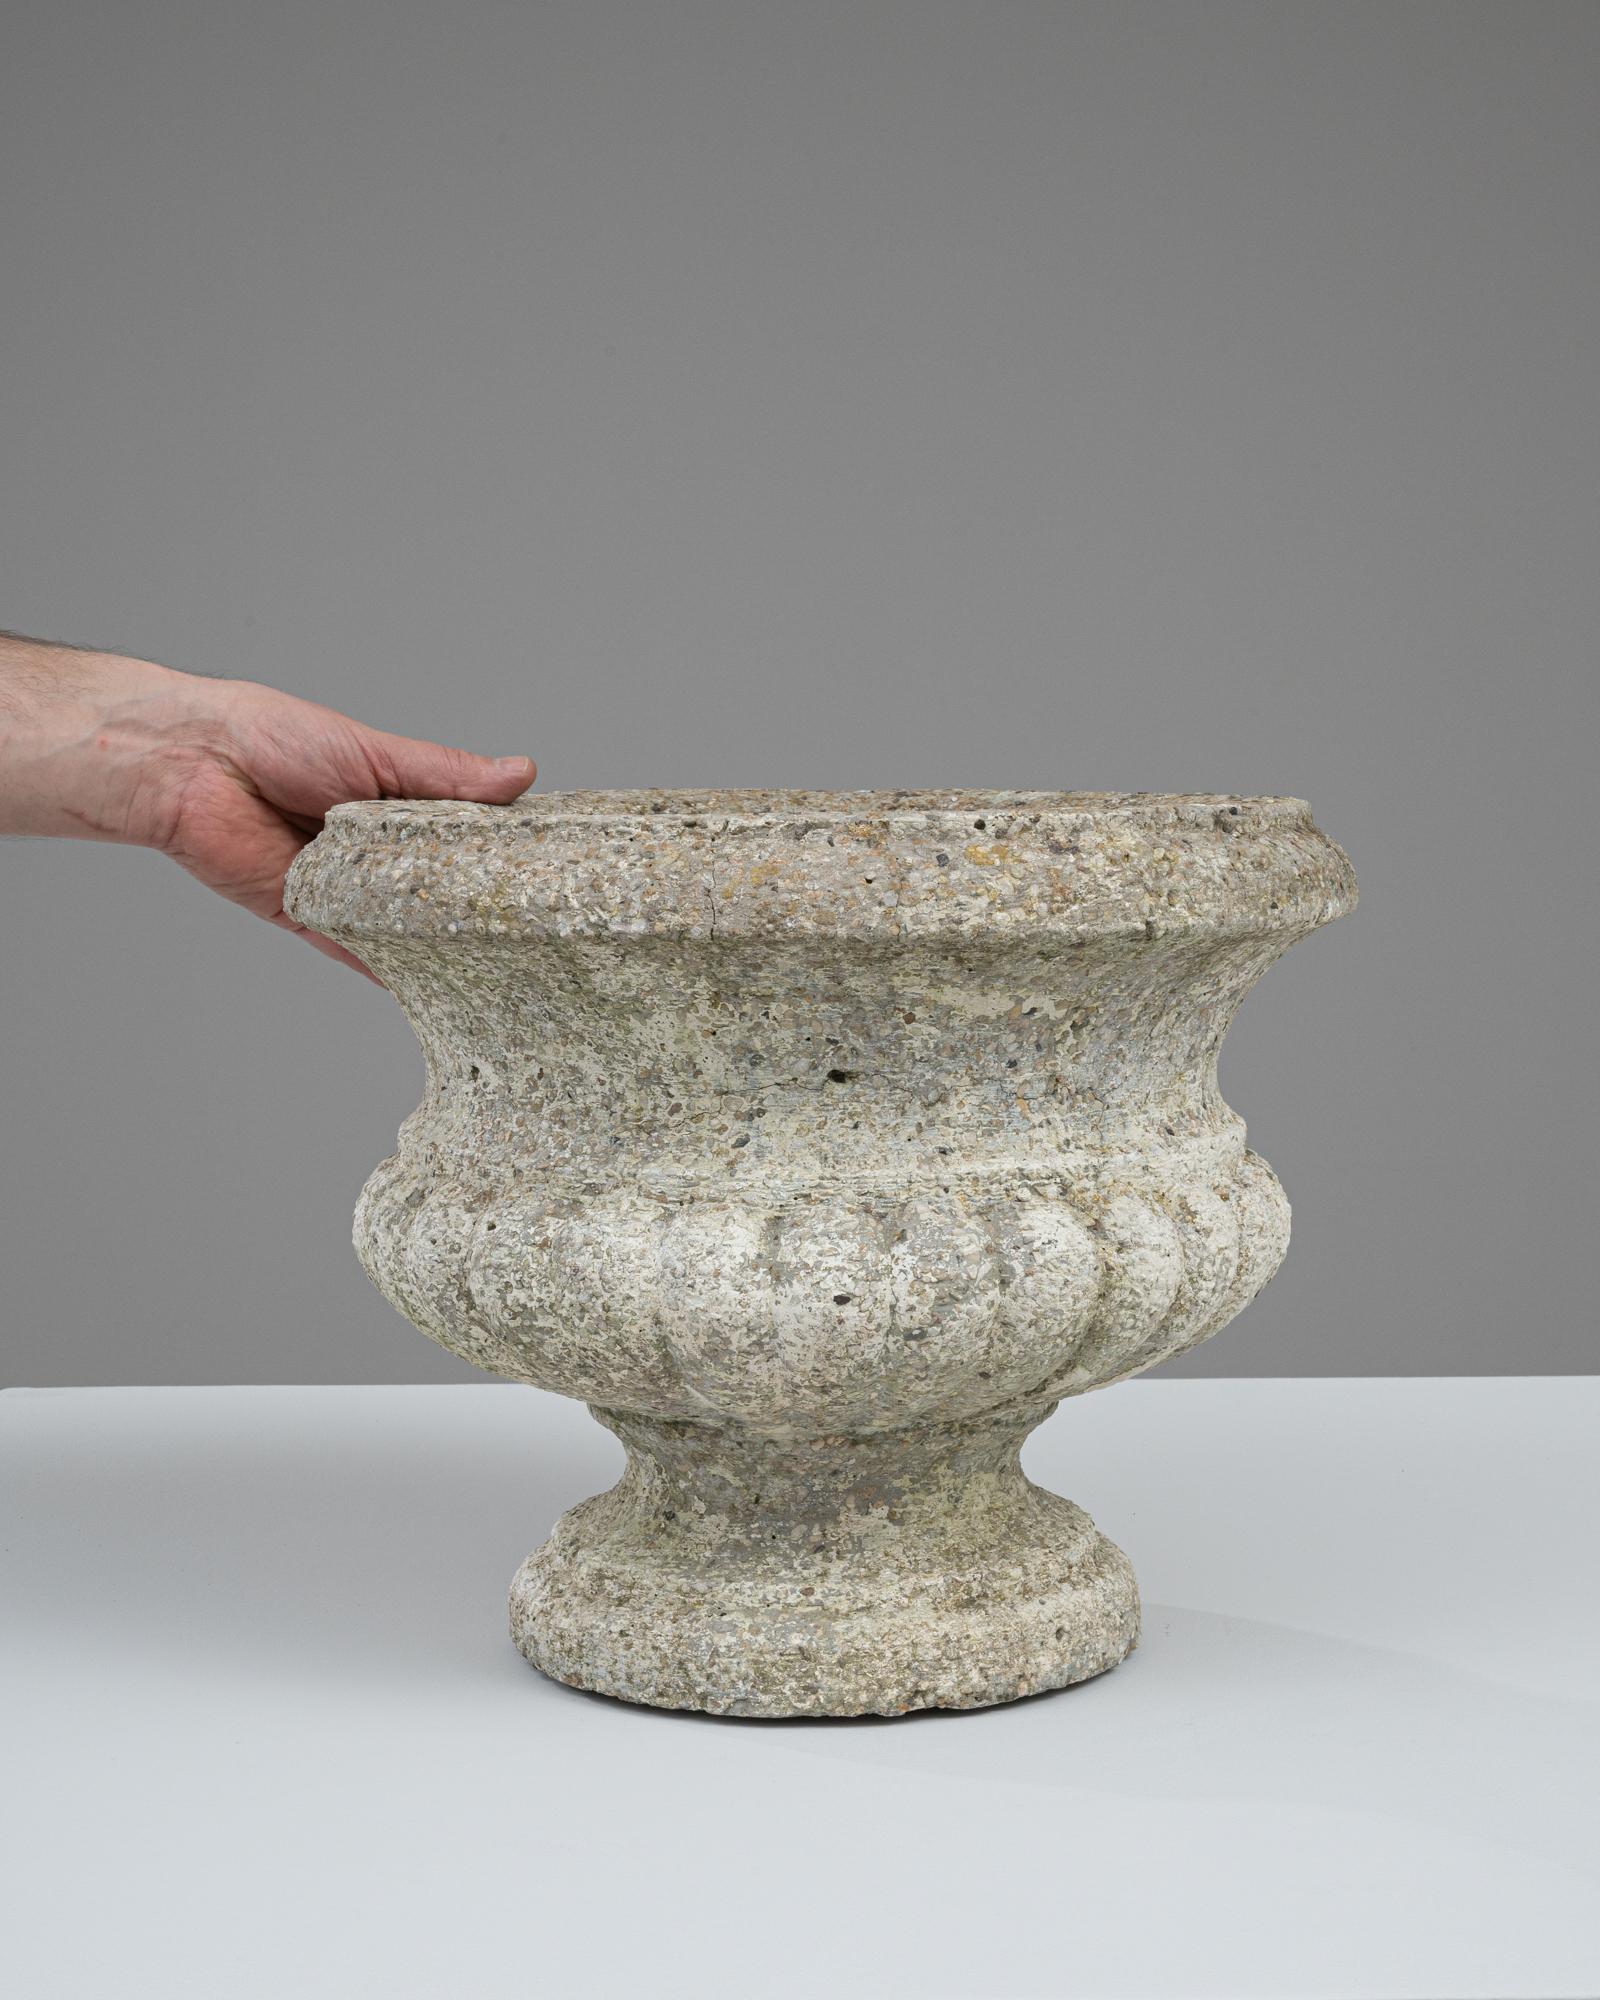 This 20th-century French concrete planter embodies a timeless aesthetic with its classic design and speckled, stone-like finish. Its robust, bulbous shape and wide, flared rim provide a solid foundation for displaying a lush array of plants or